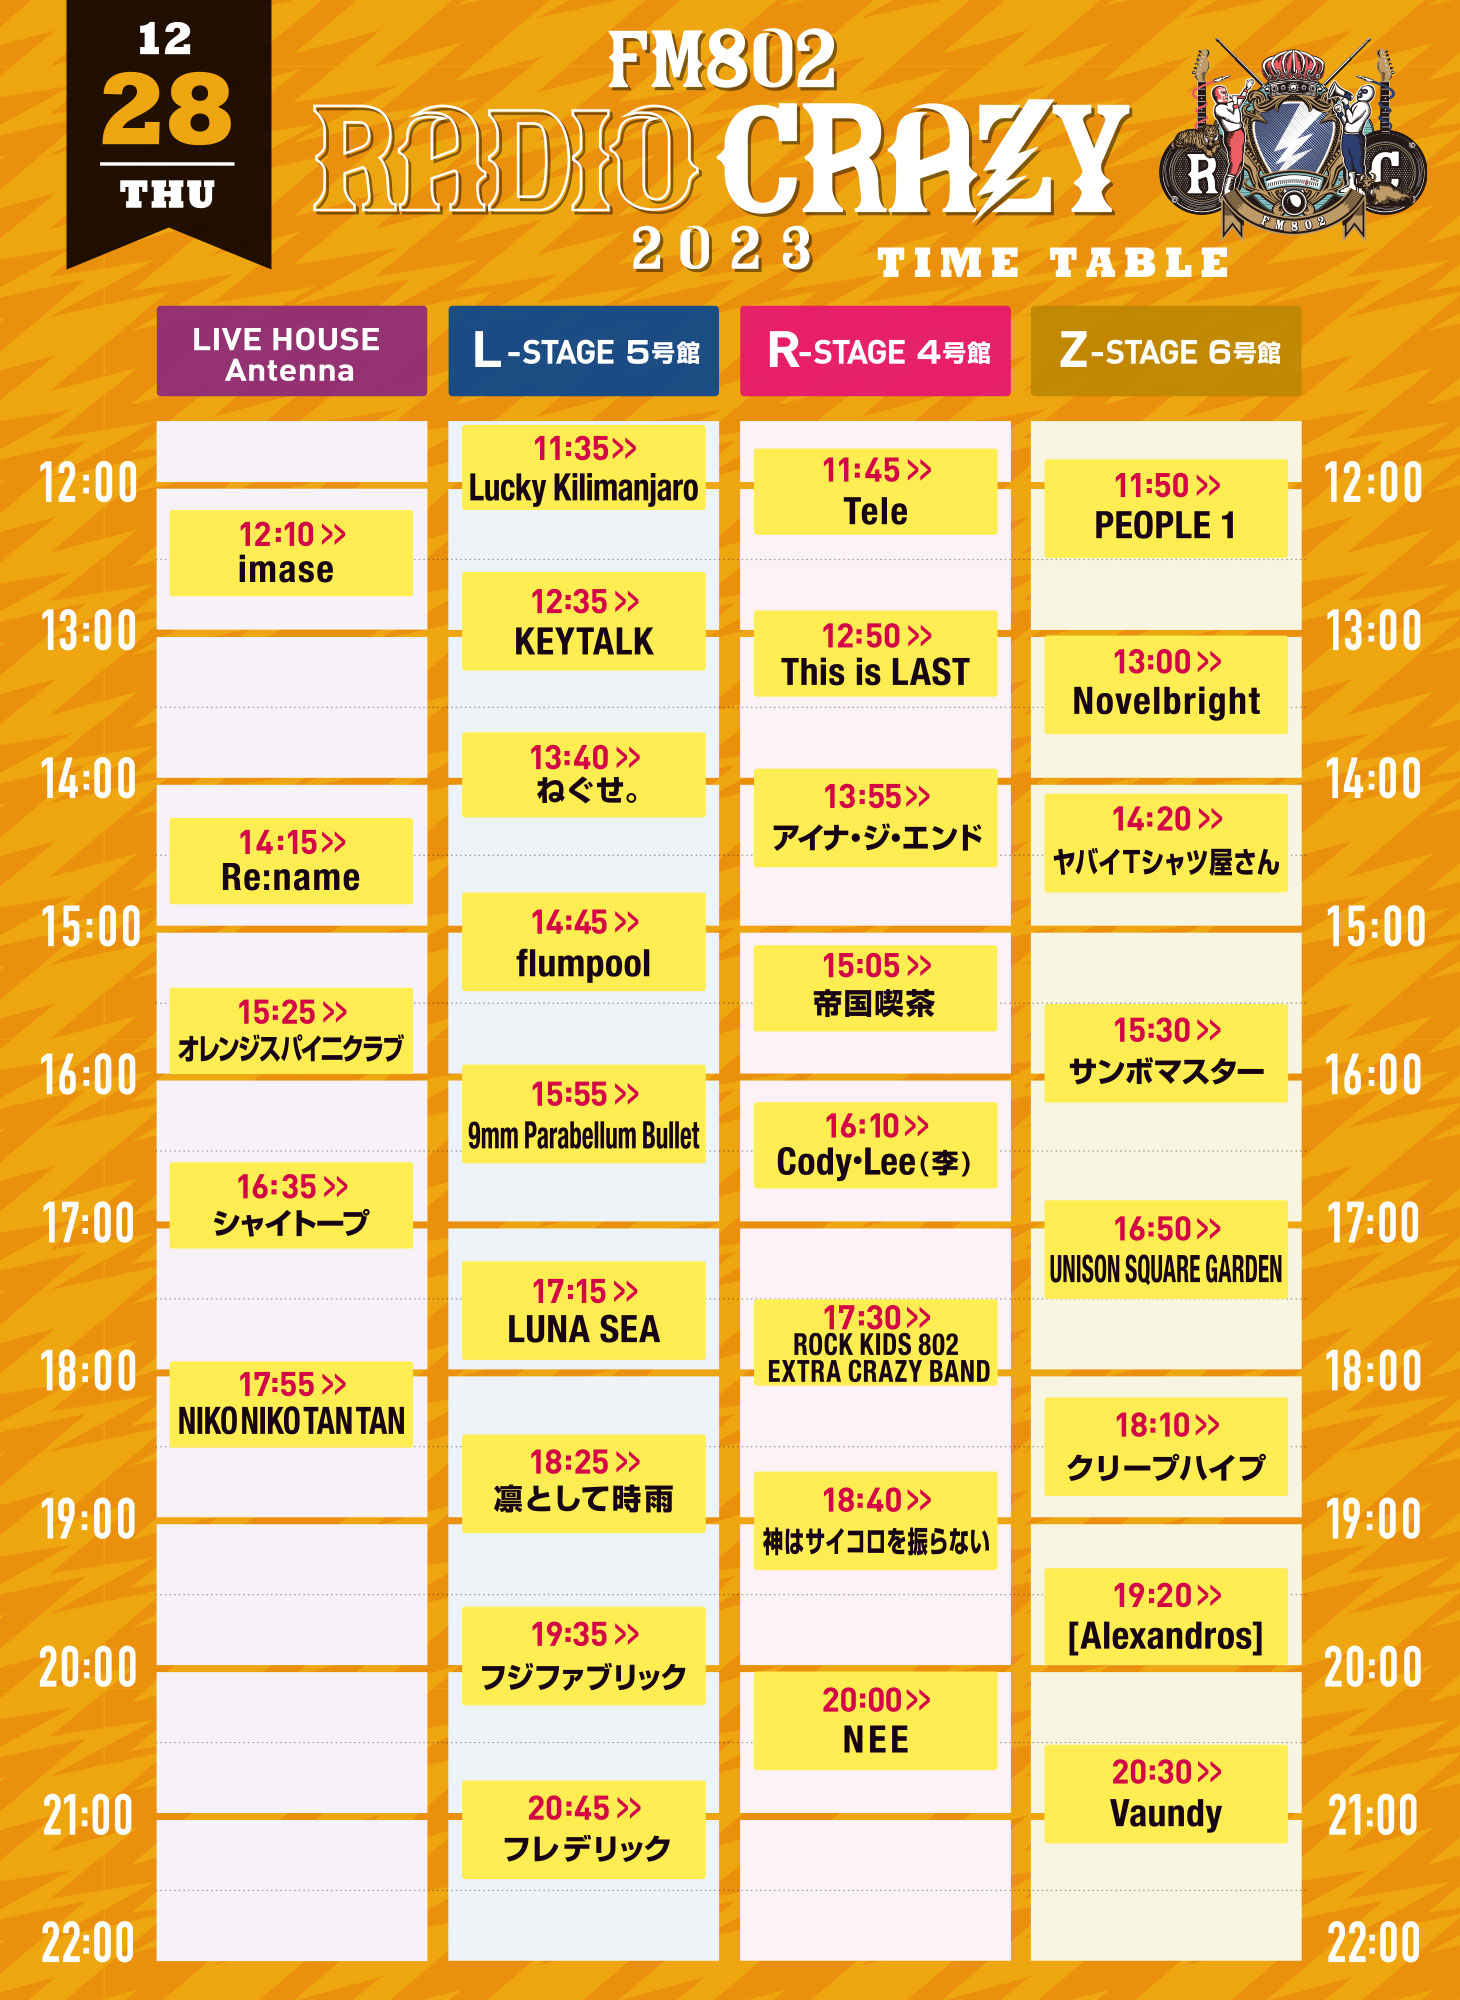 RADIO CRAZY TIME TABLE［28 THU］